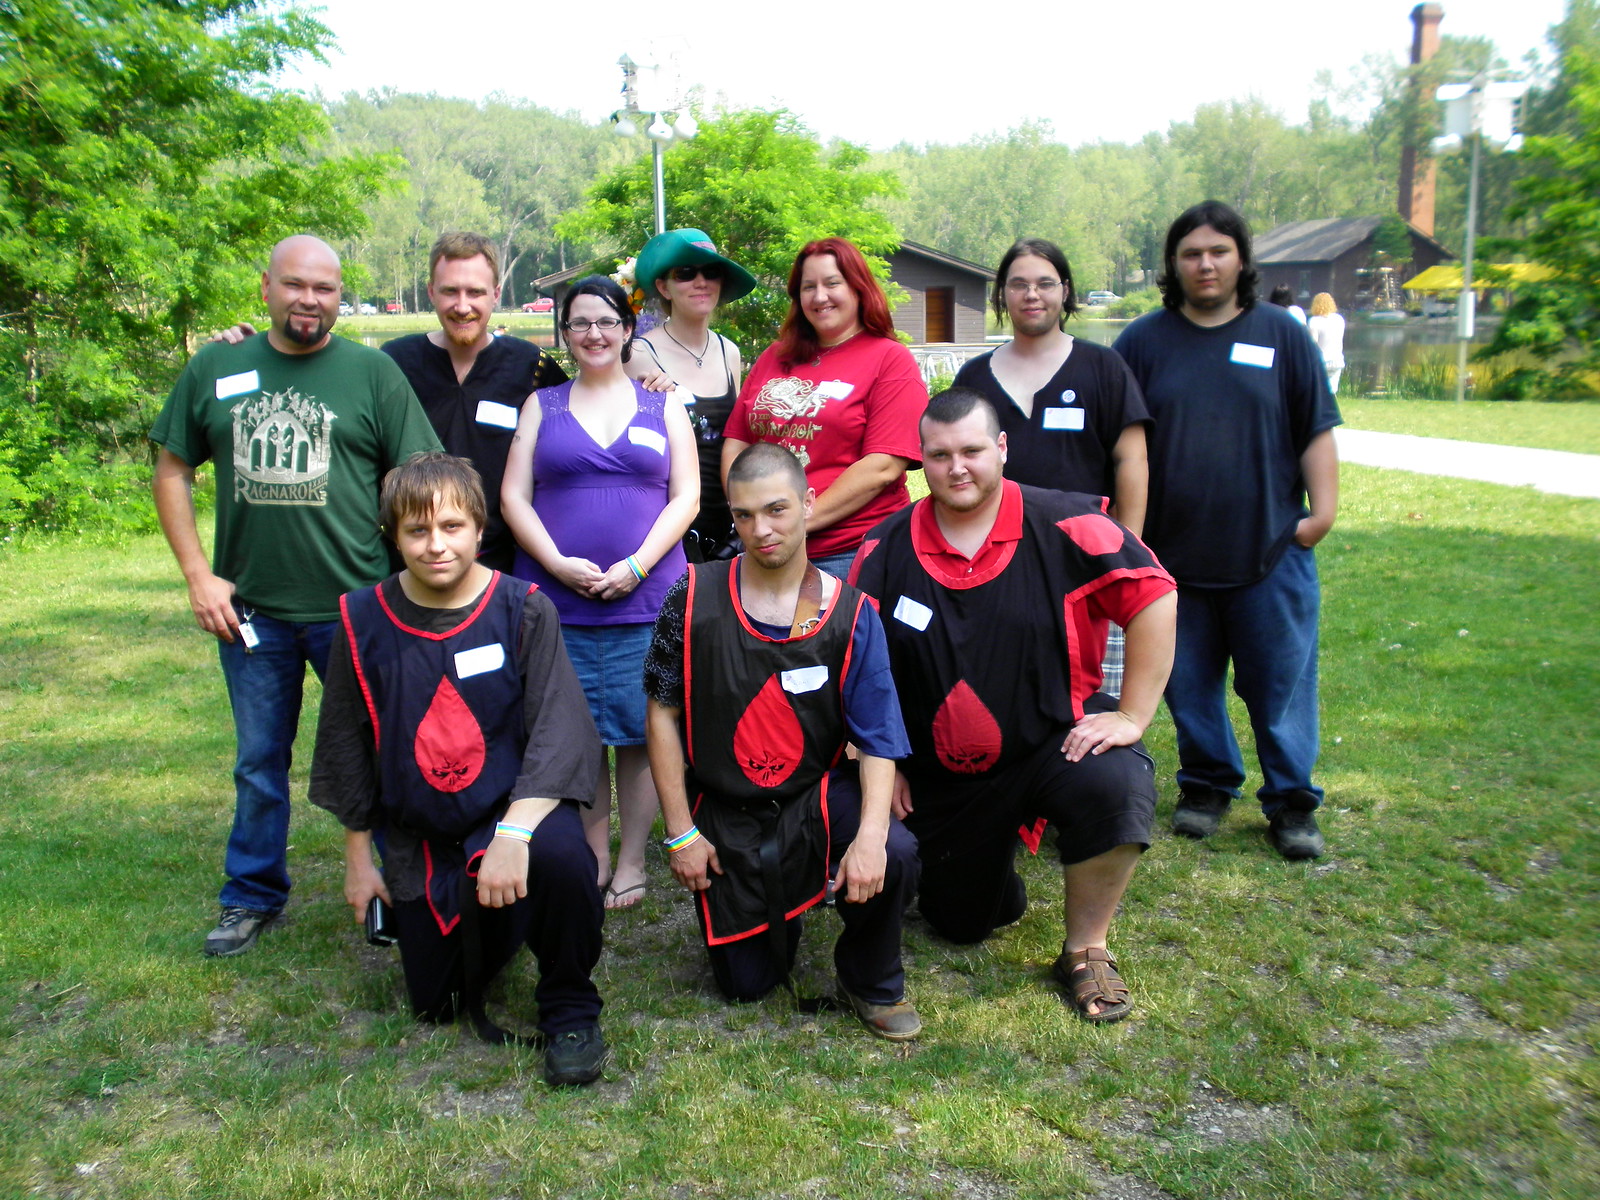 Eric with Dagorhir friends, The Blood Horde. Photo by Deb Spilko.